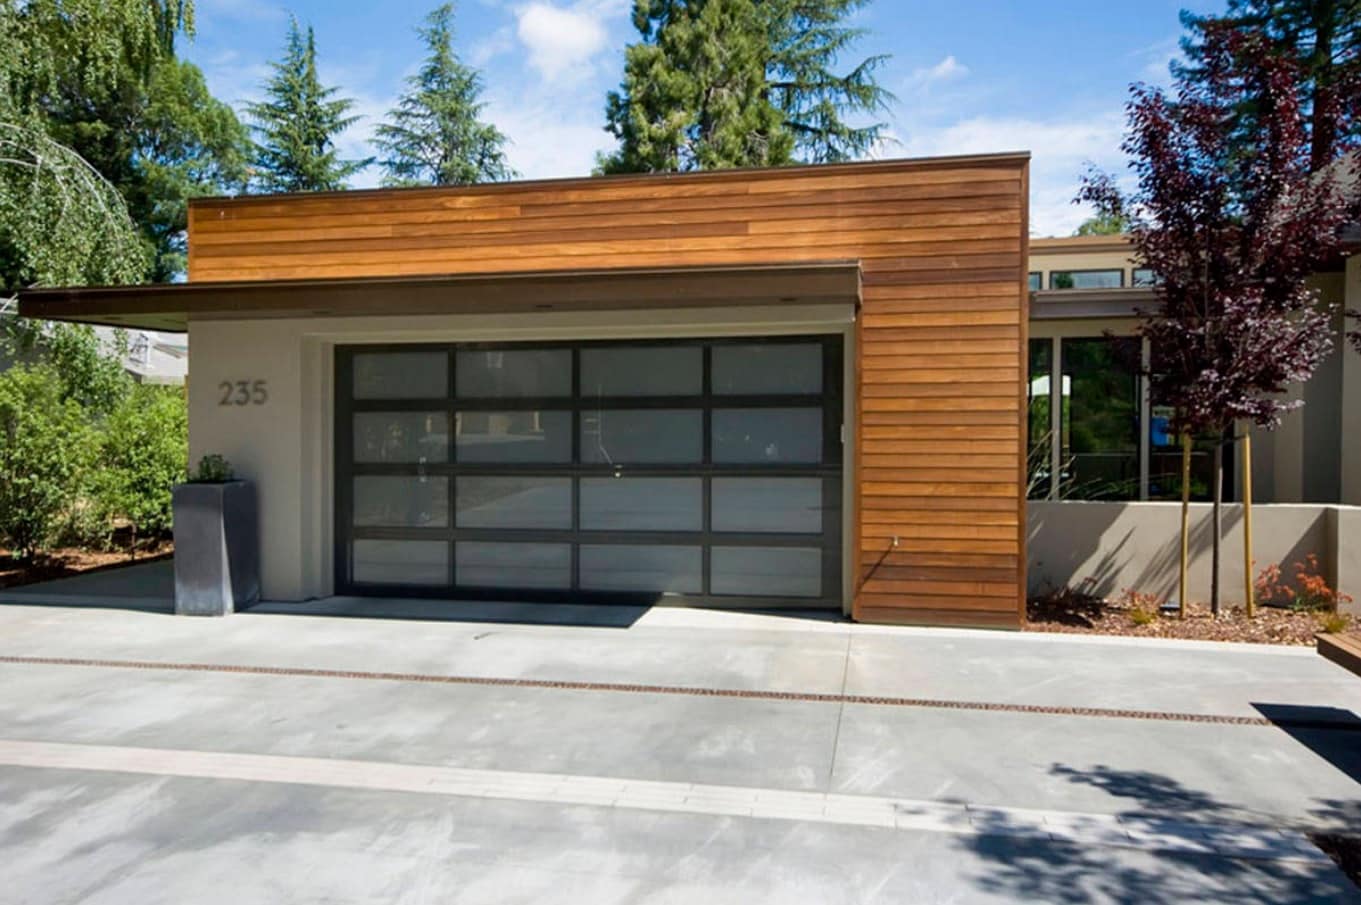 What are Residential Garage Doors? Up and over door construction at the ultramodern designed cottage